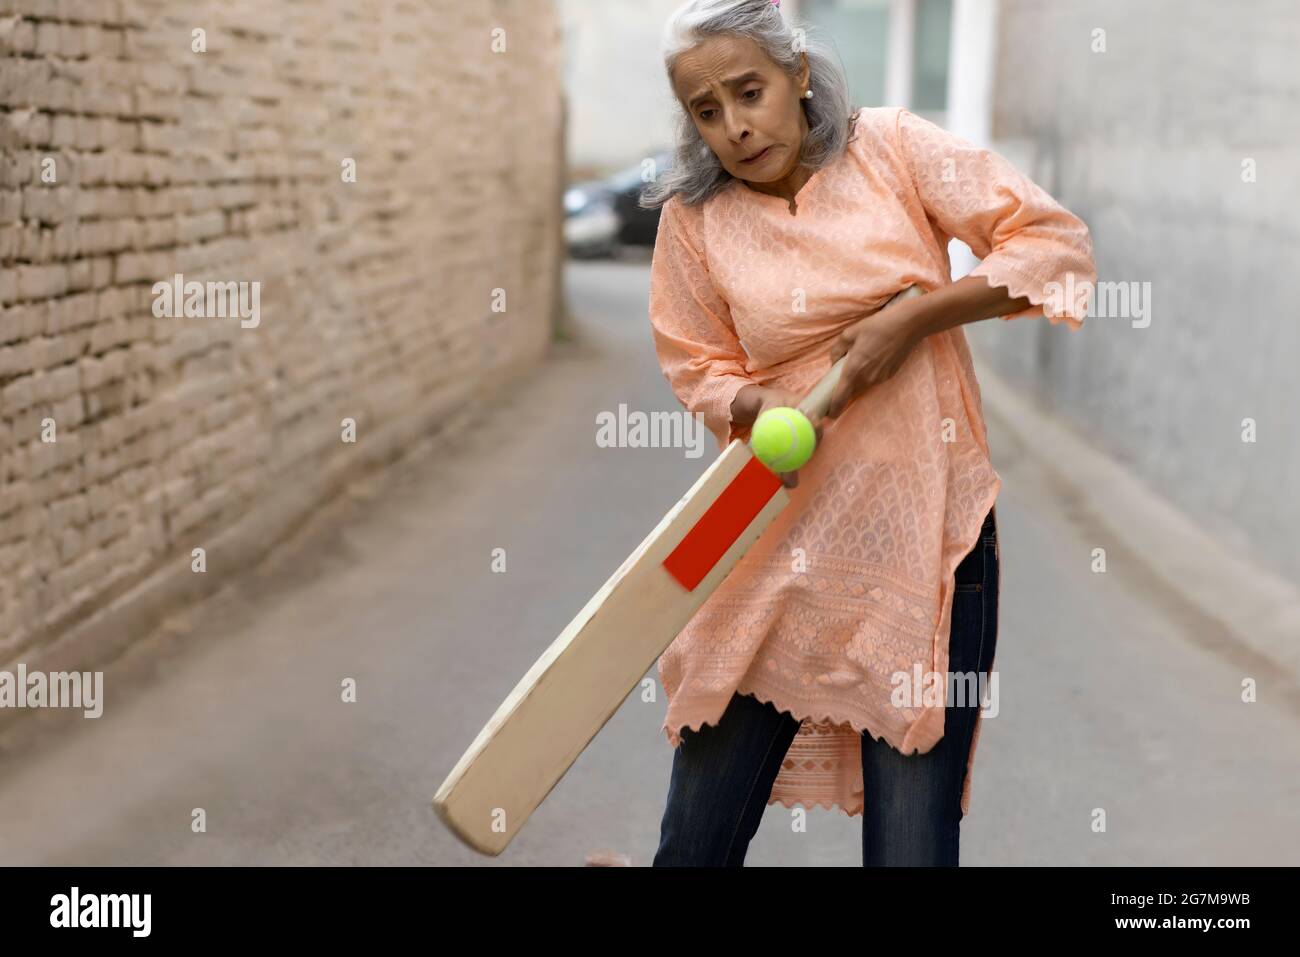 An old woman playing cricket. Stock Photo